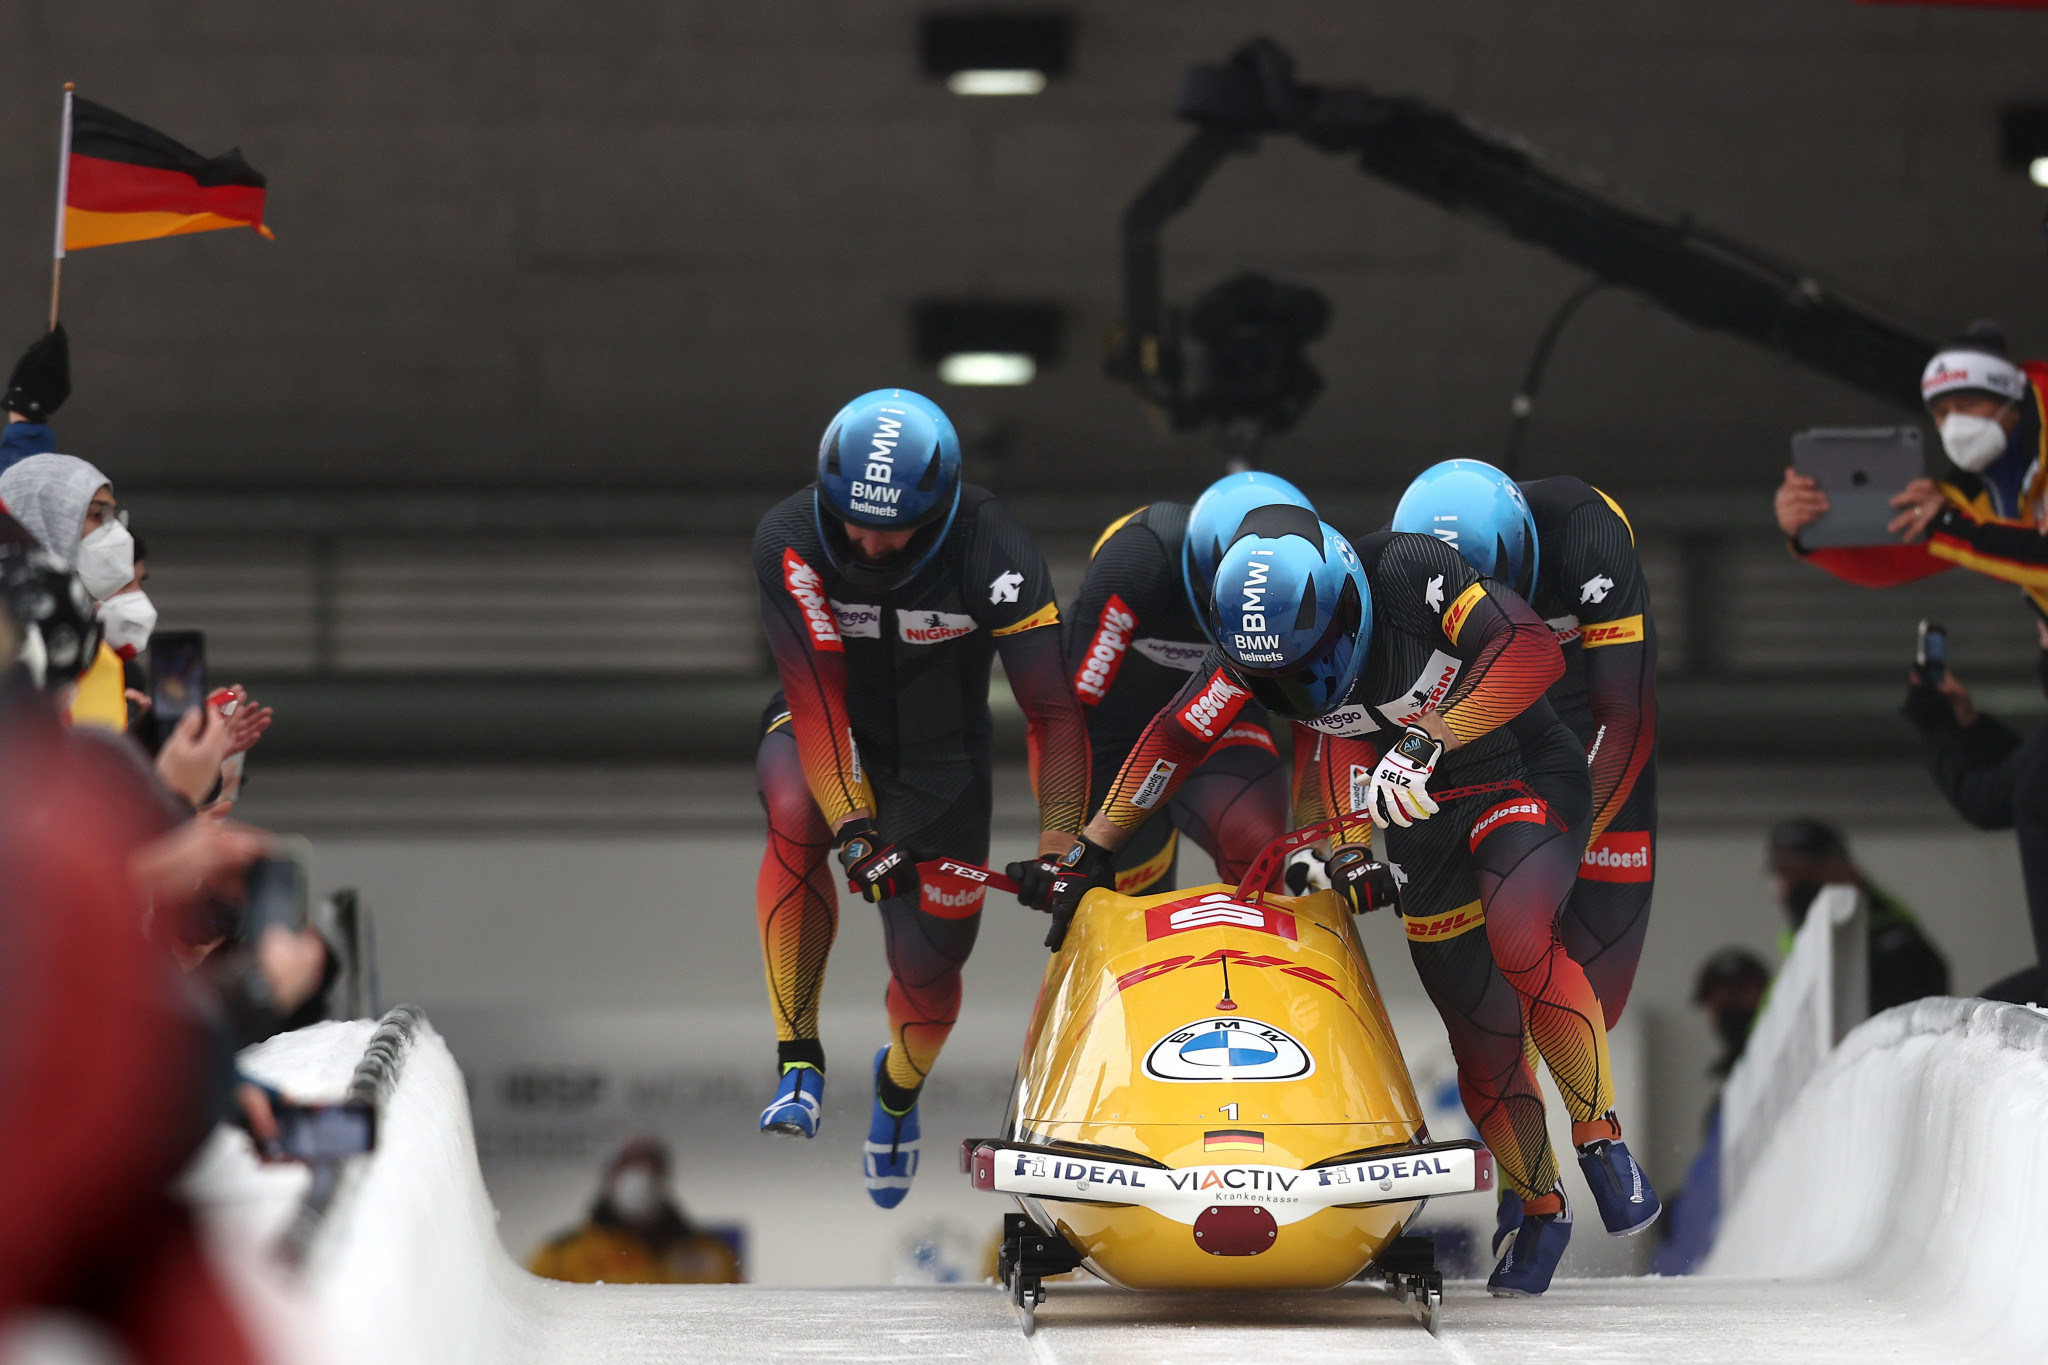 Friedrich seals overall four-man title as Rutherford makes IBSF World Cup debut